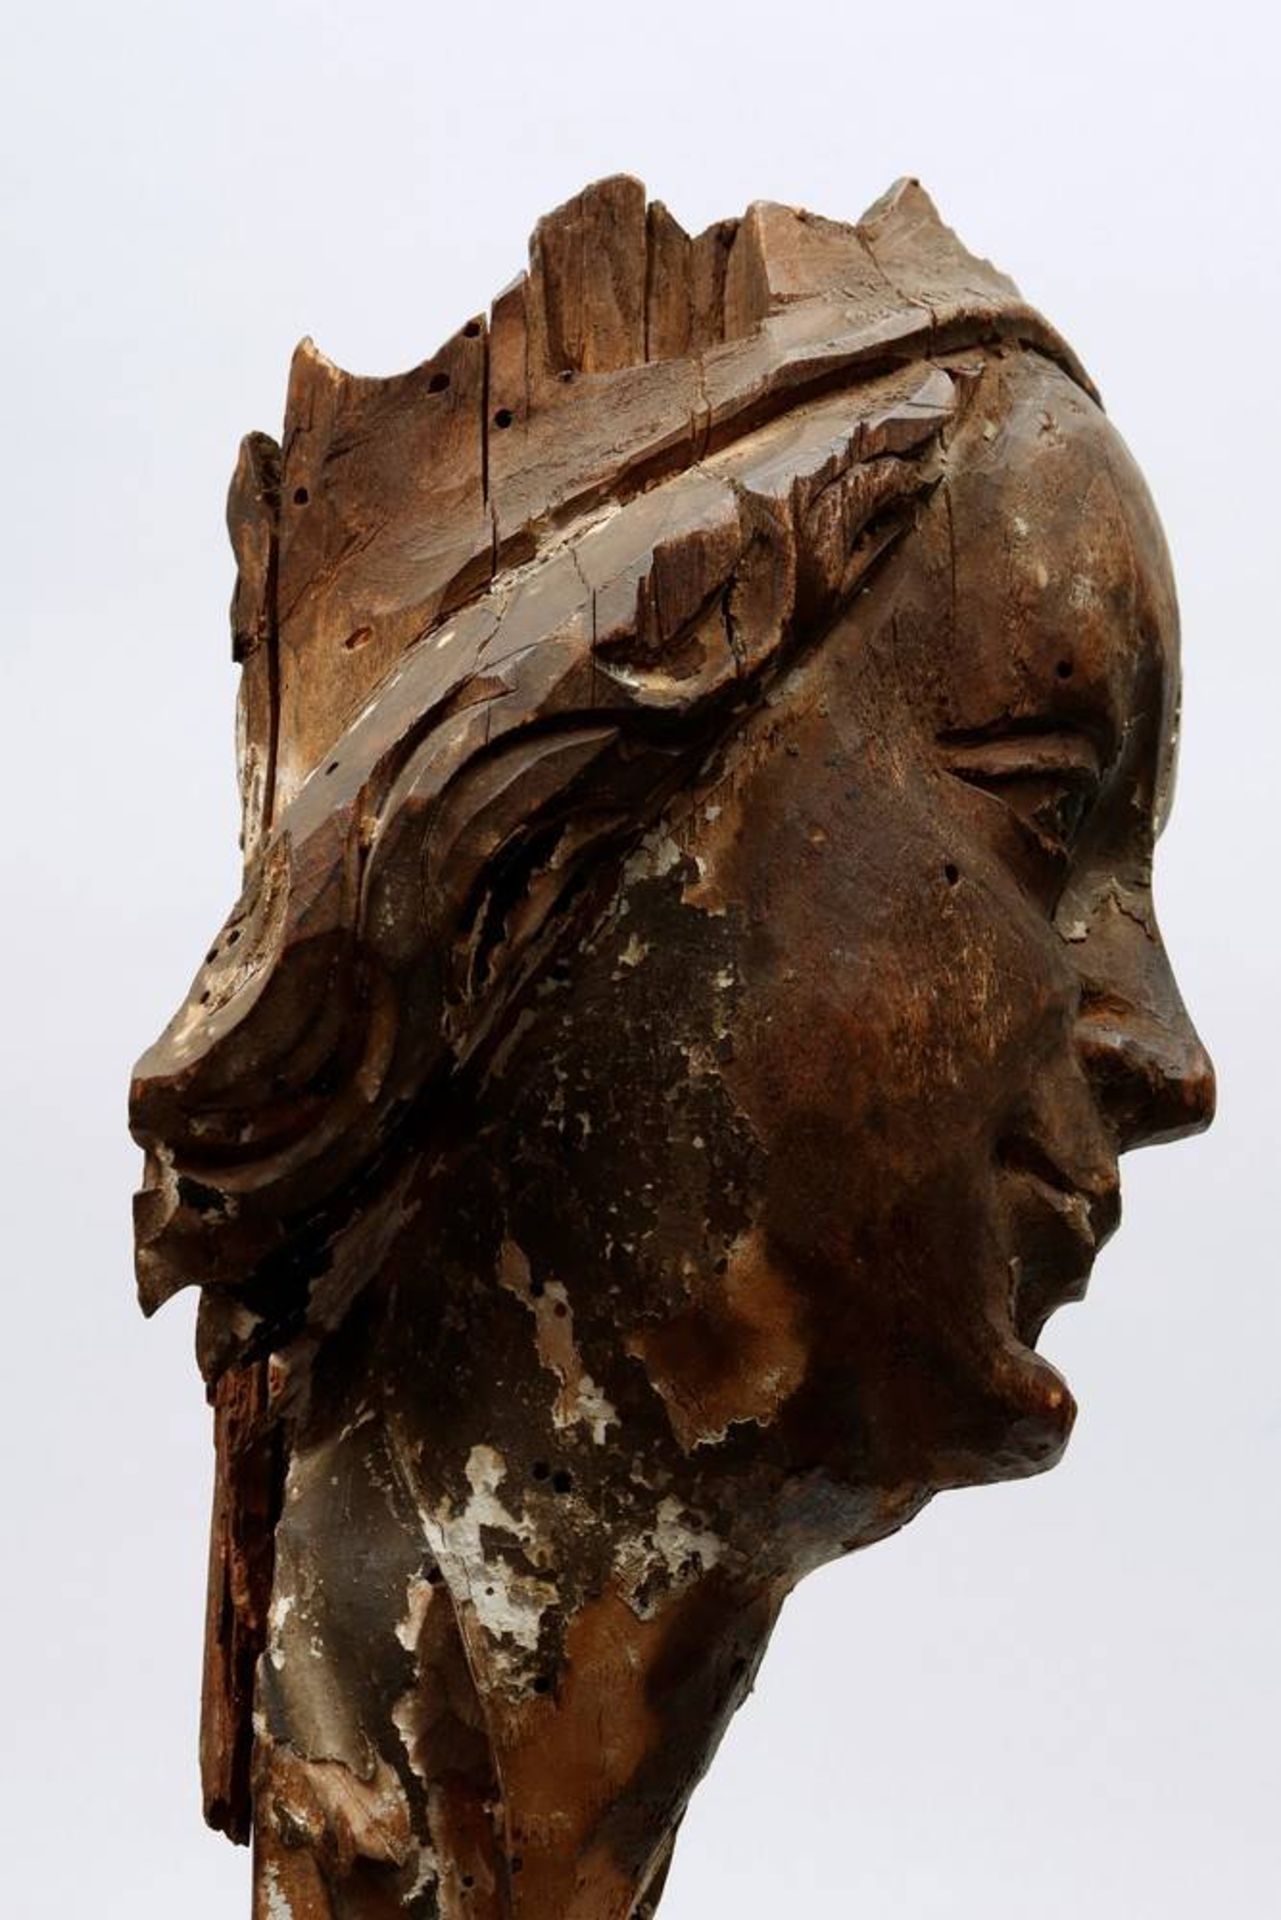 Mater Dolorosaposs. south german, 17th C., carved wood, painted in colours, head fragment, H 23cm, - Bild 2 aus 4